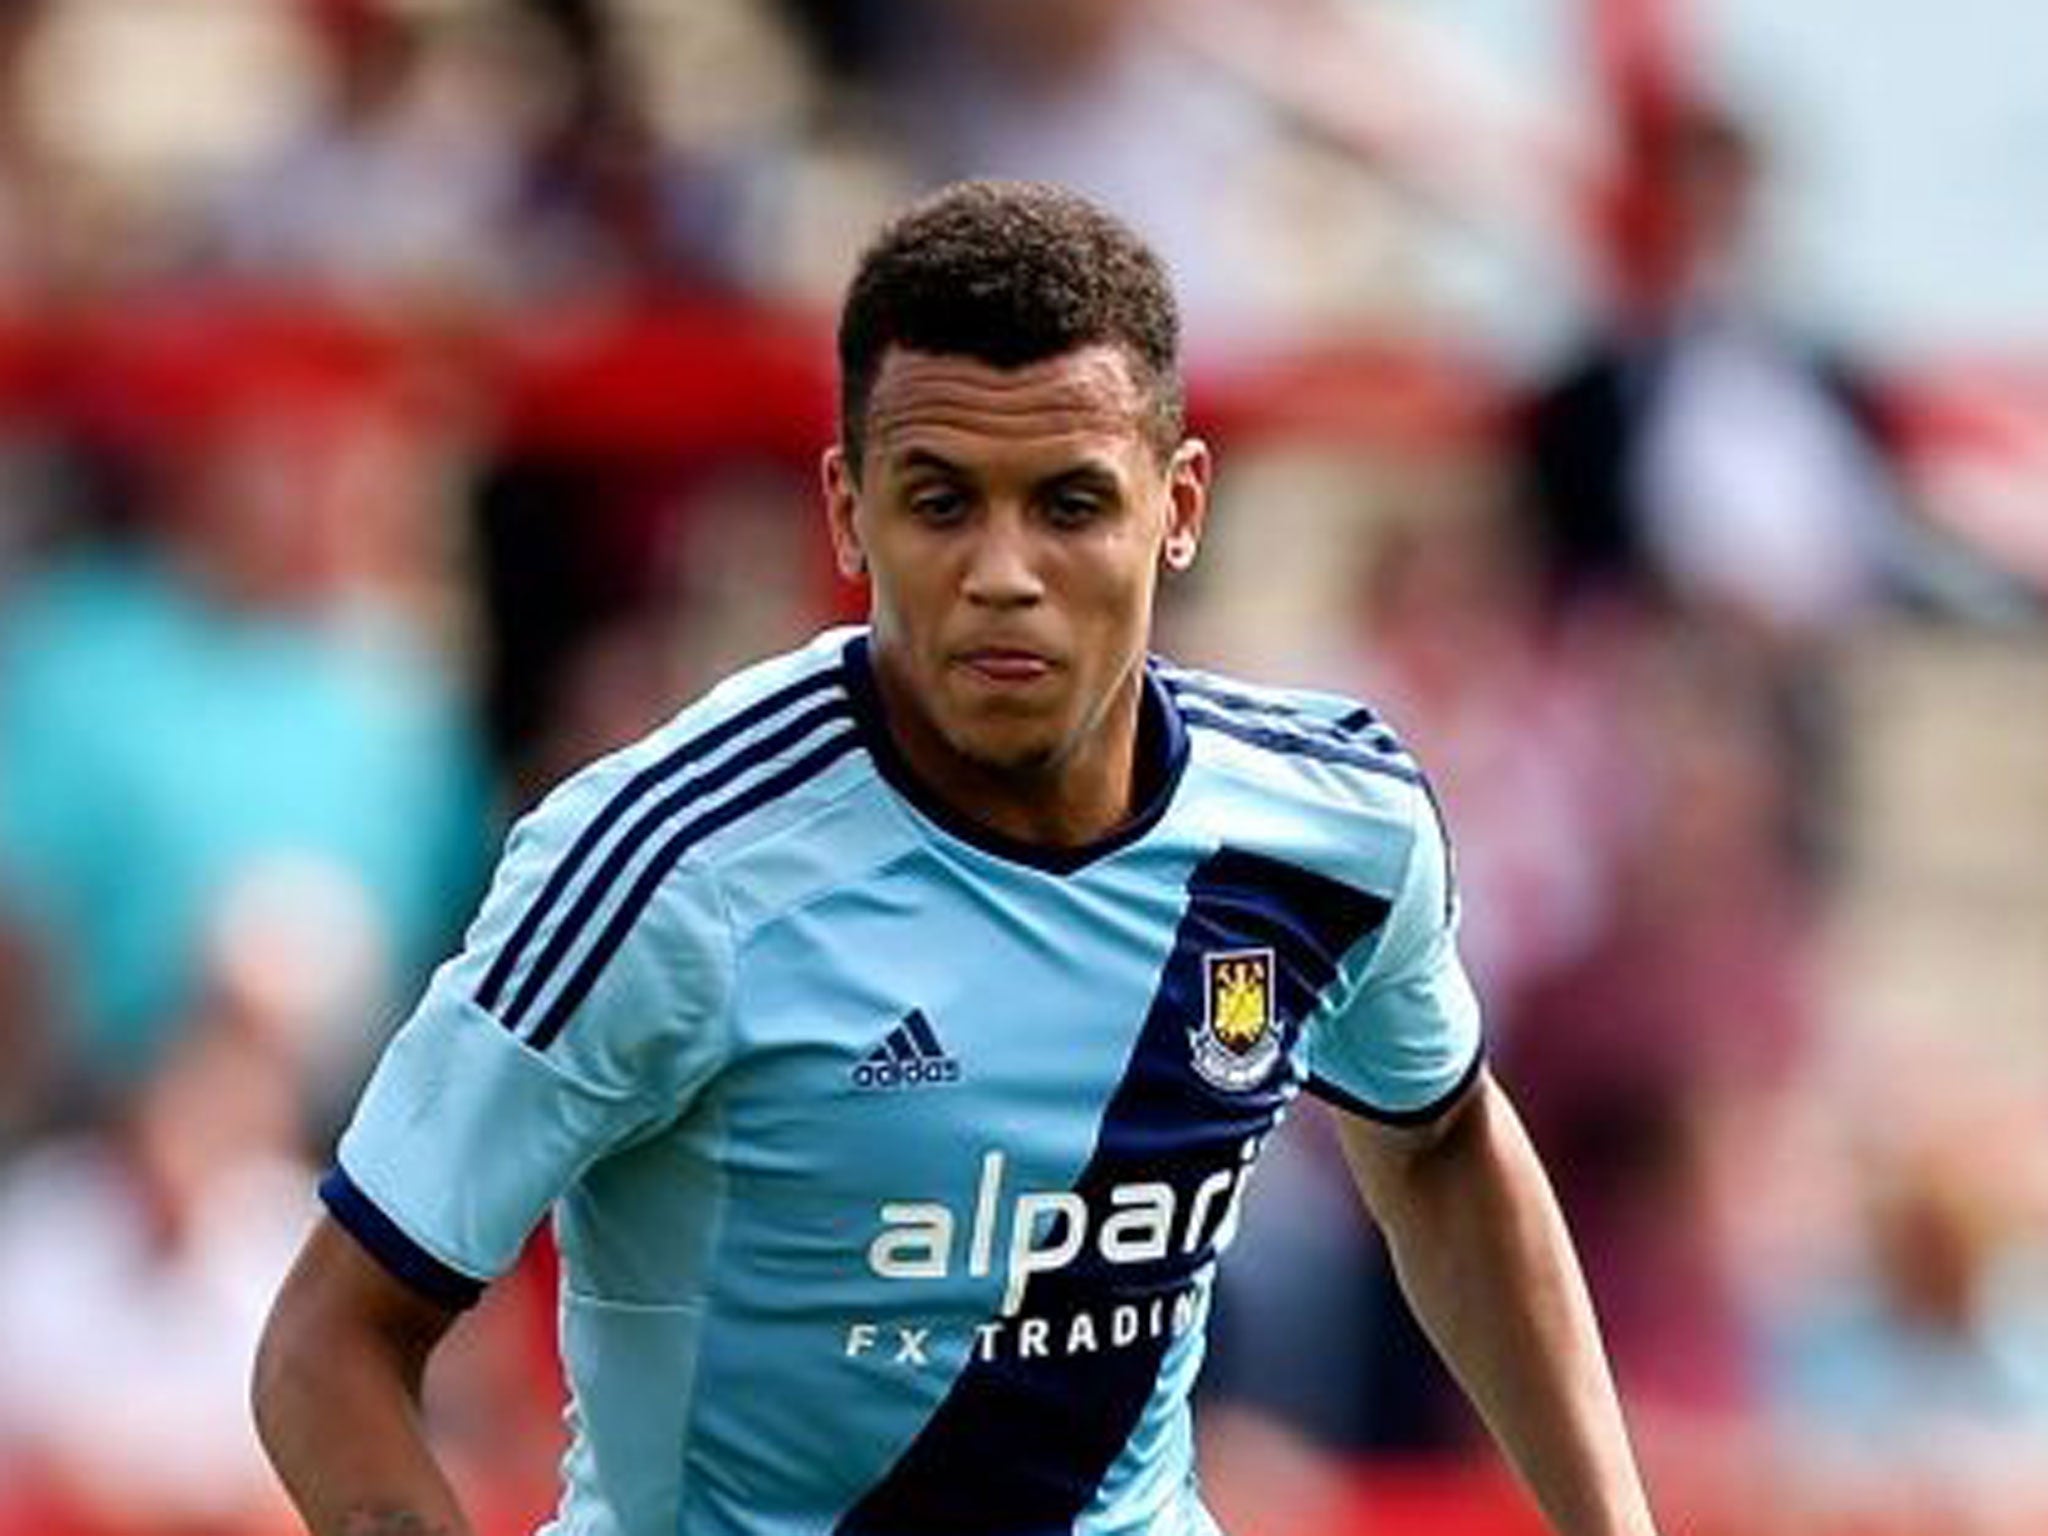 Ravel Morrison tweeted he had joined Cardiff on loan but any deal for the winger is yet to be finalised